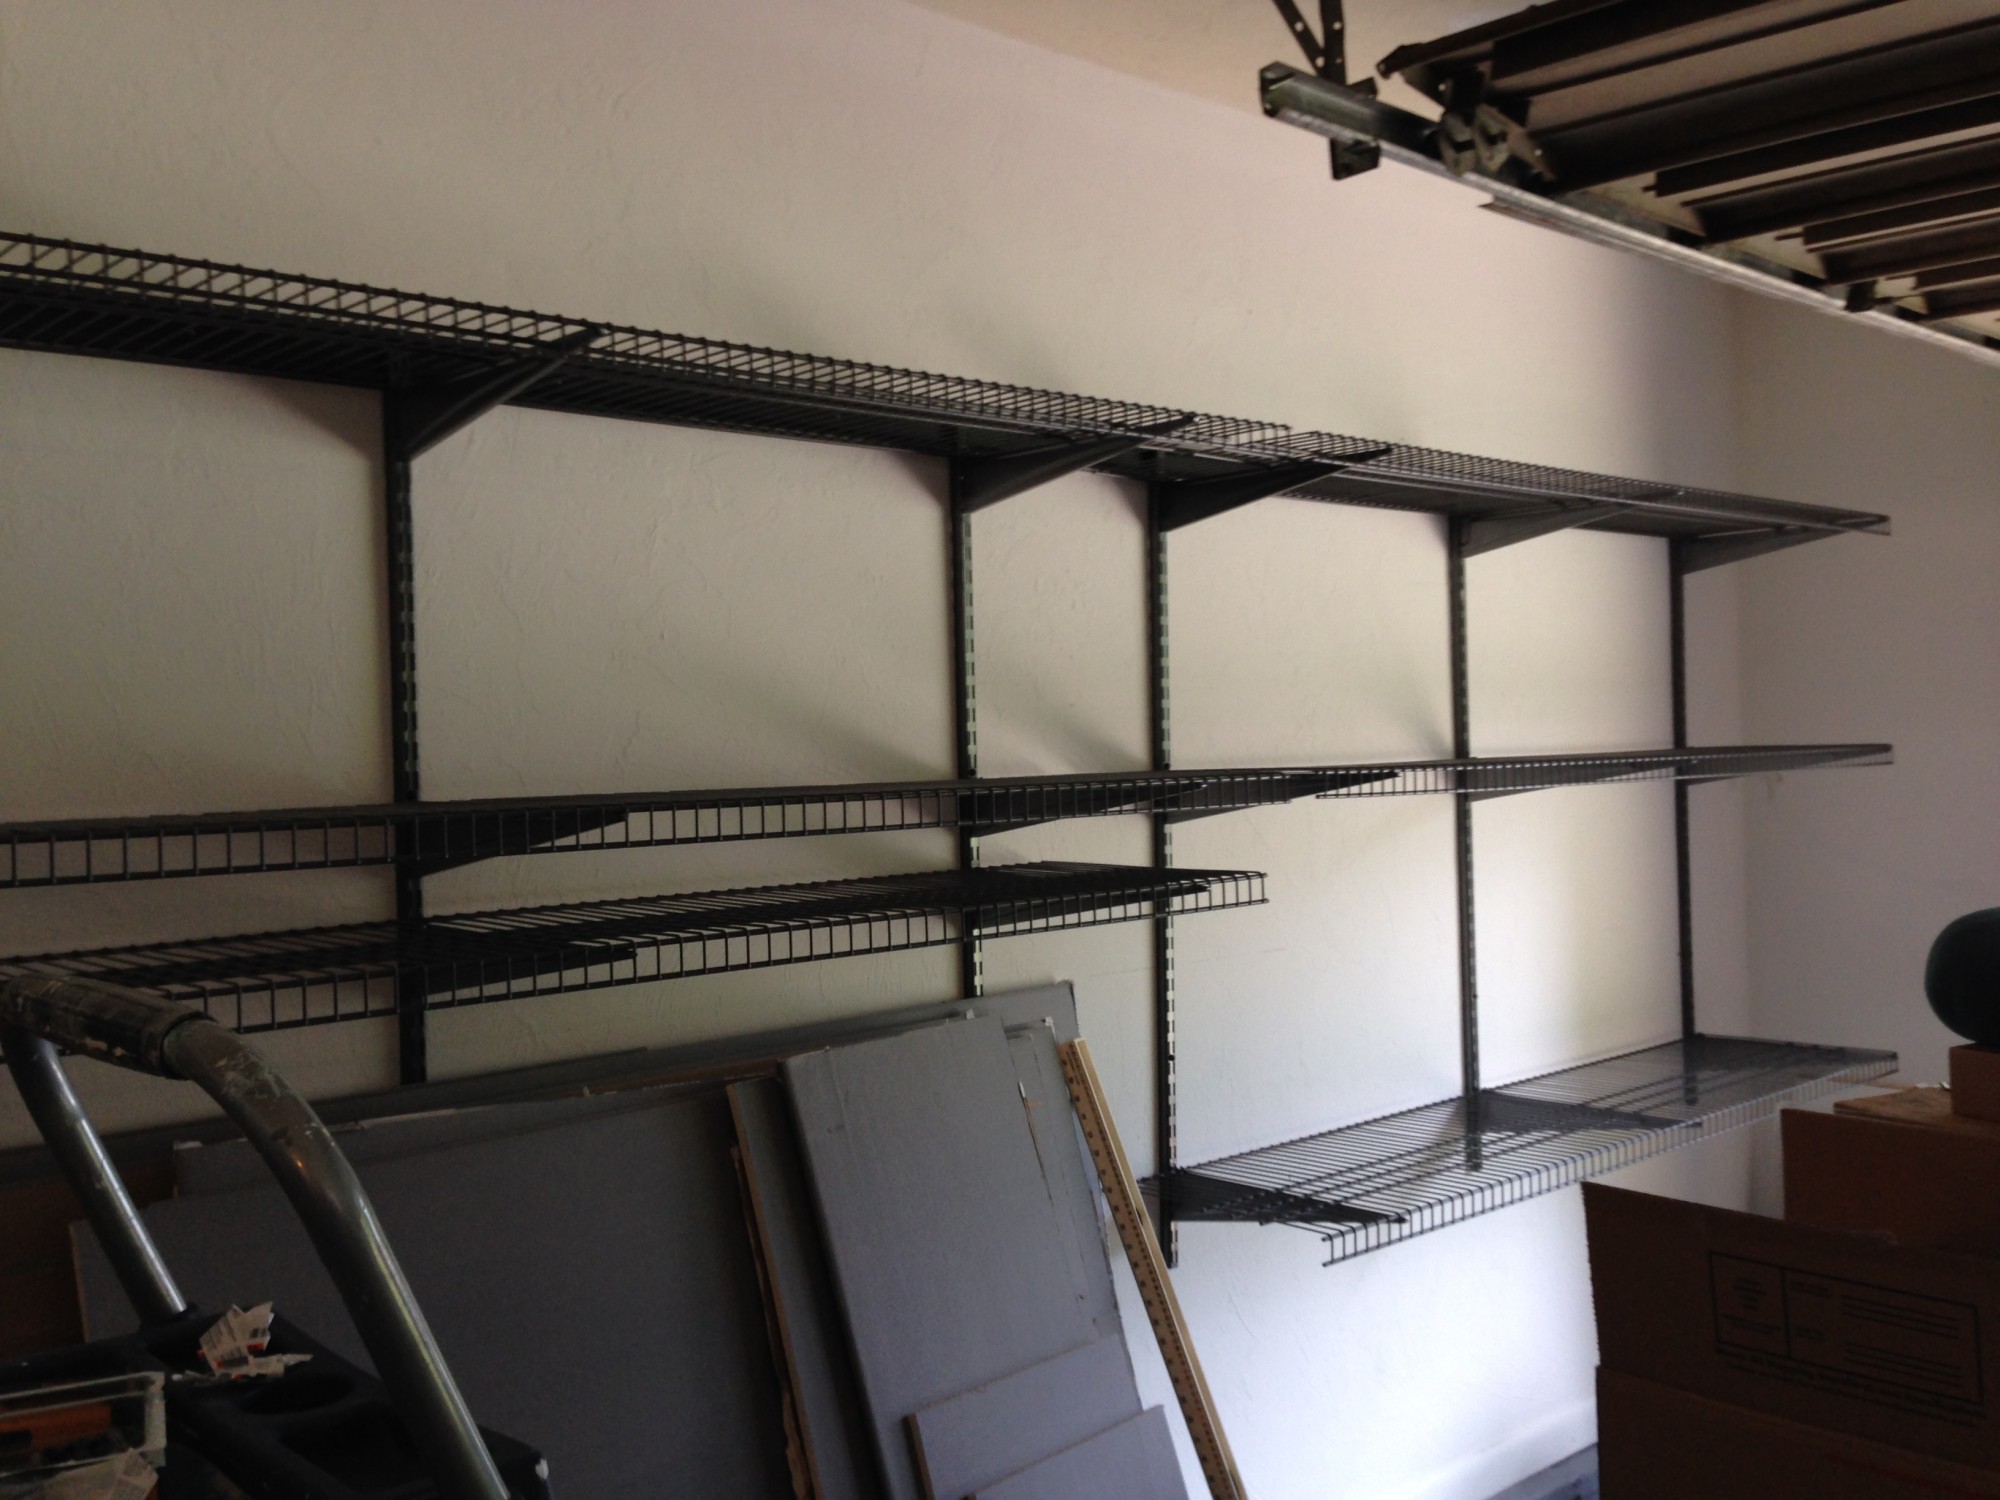 Taming the Mess: Garage Shelves Add Lots of Storage Space